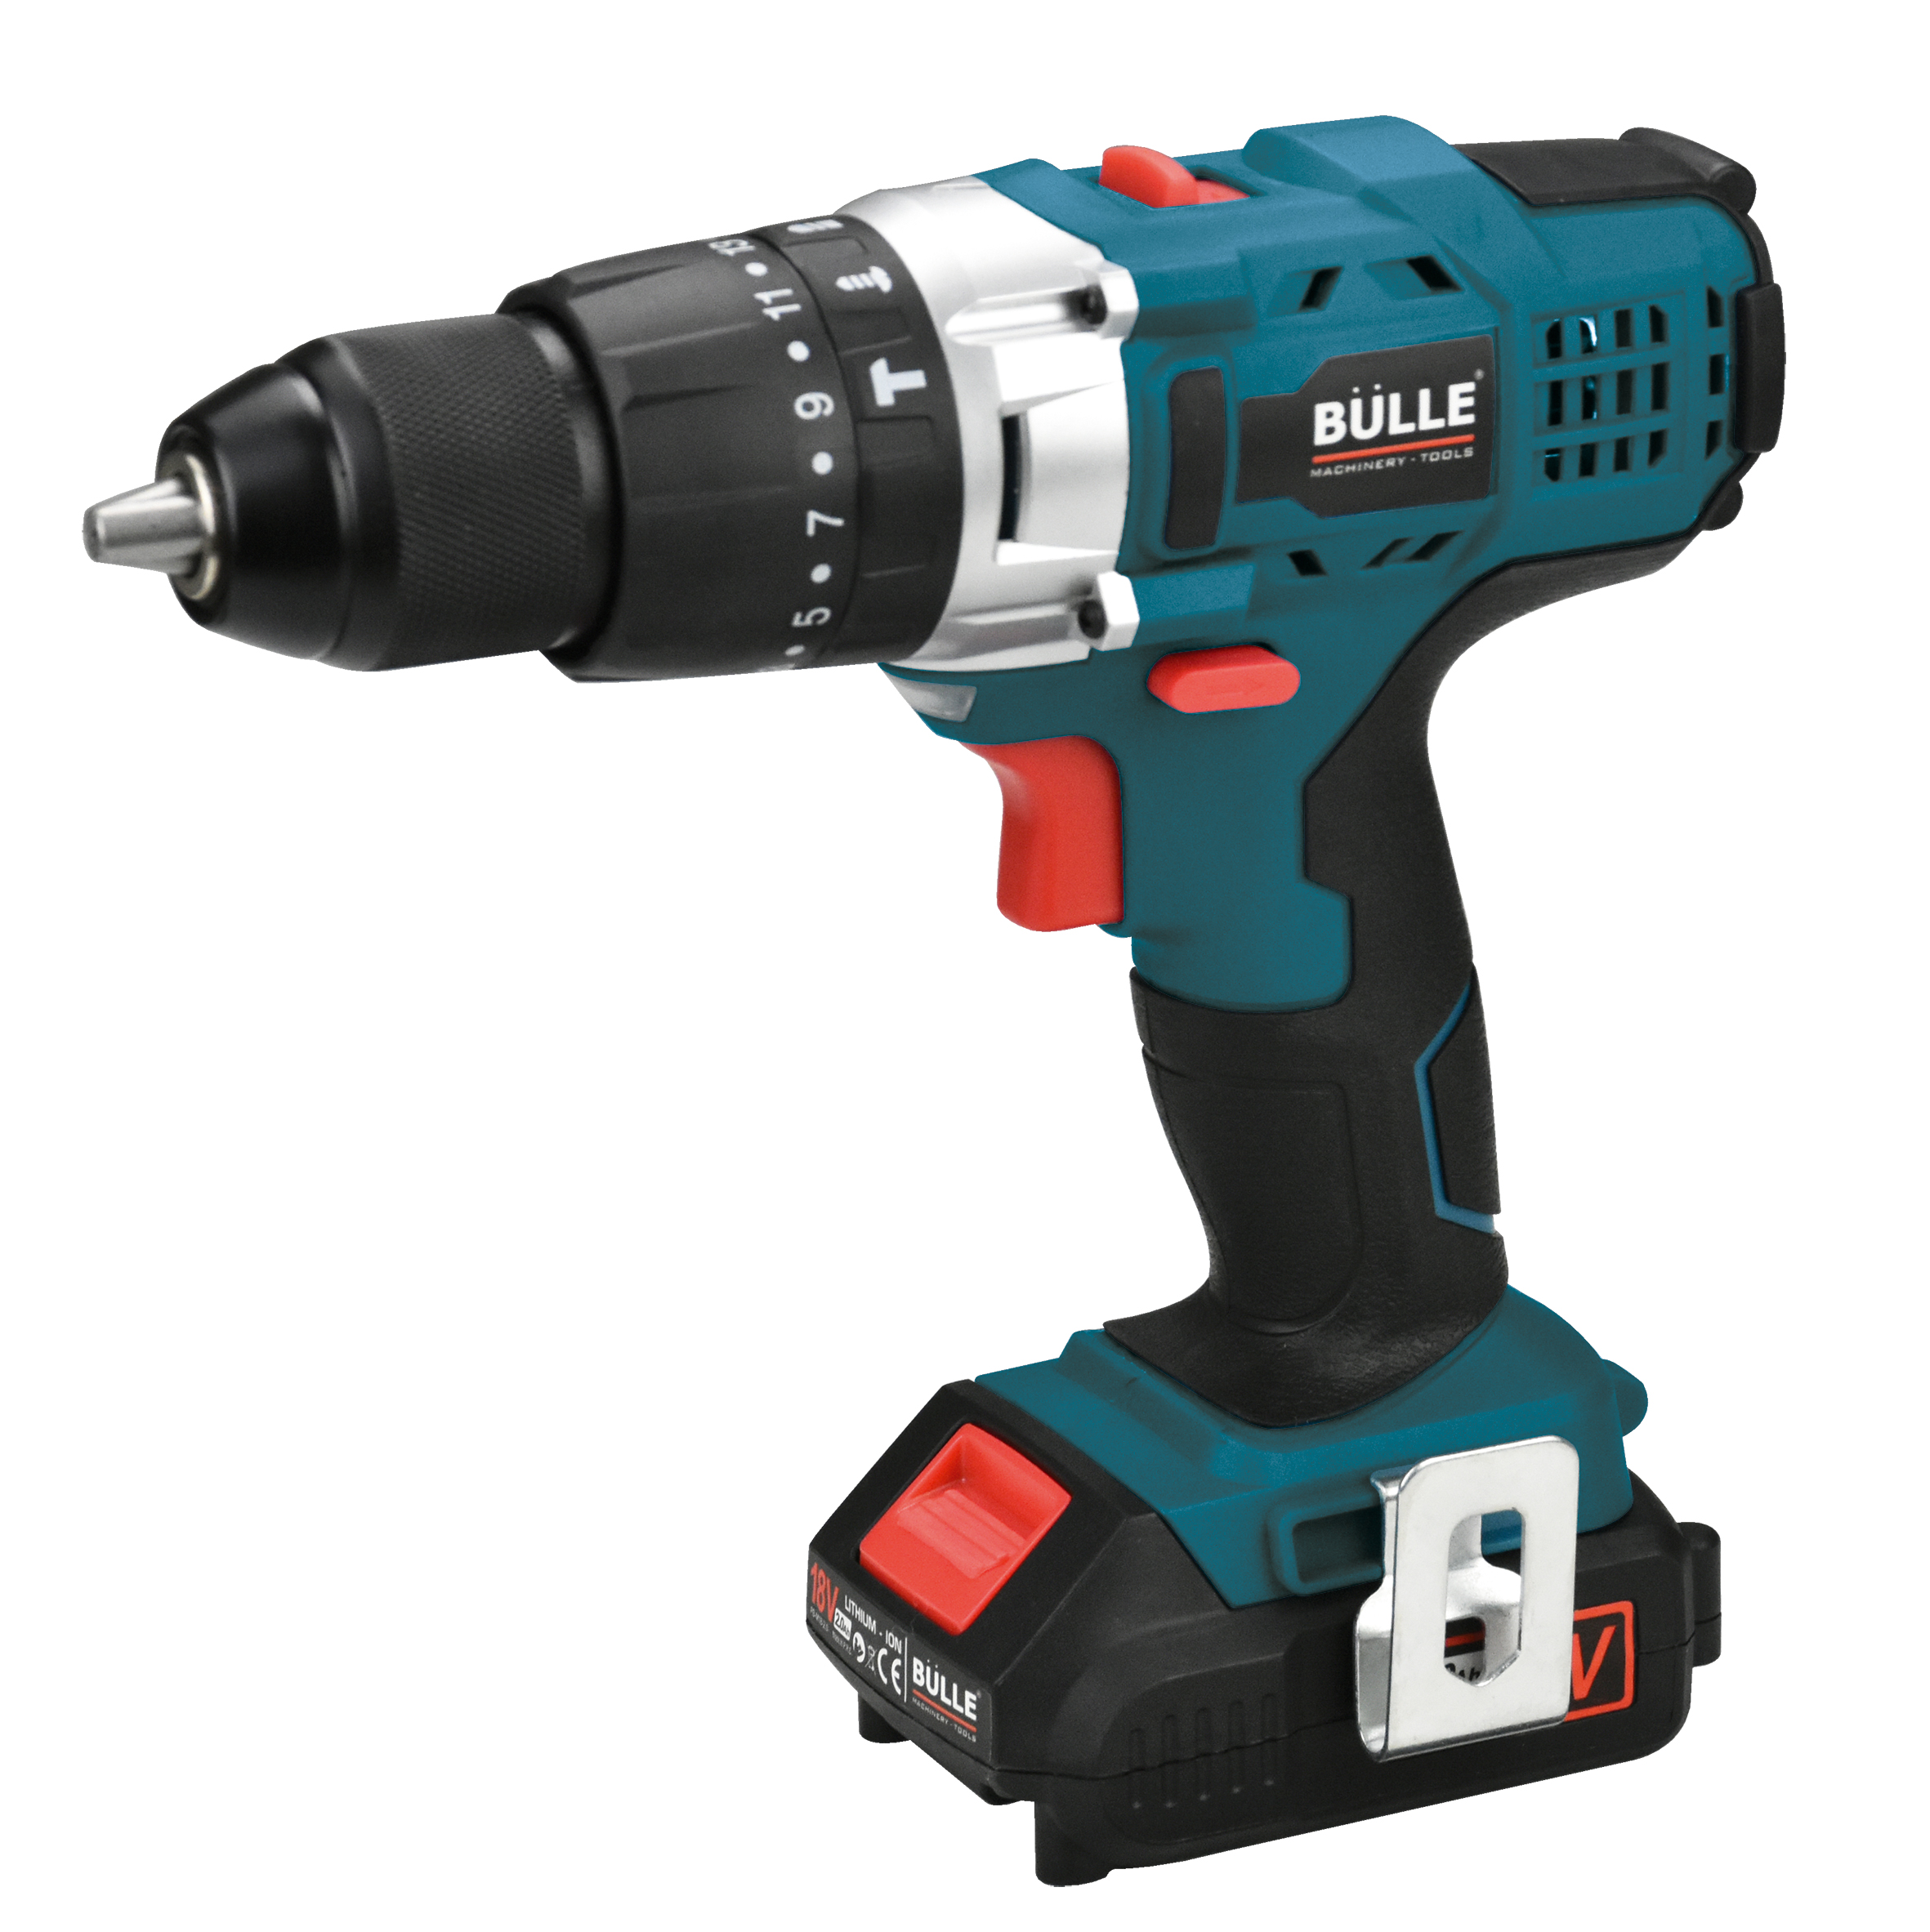 2-Speed Lithium Percussion Drill 18 V 2 x 2.0Ah Bulle - 2